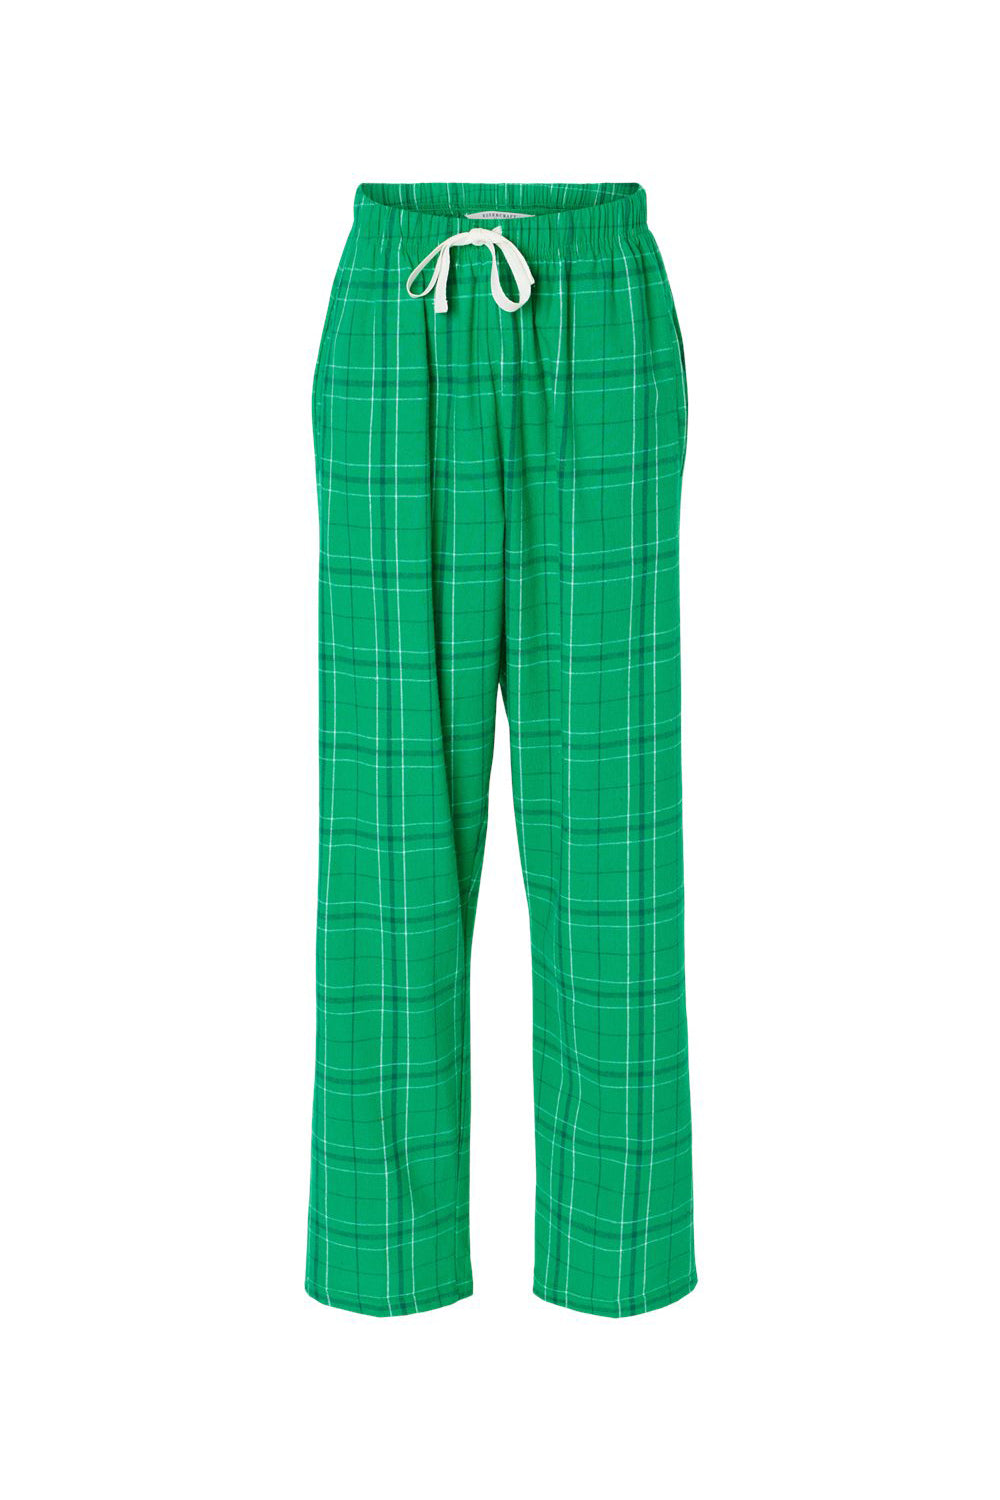 Boxercraft BW6620 Womens Haley Flannel Pants Kelly Green Field Day Plaid Flat Front